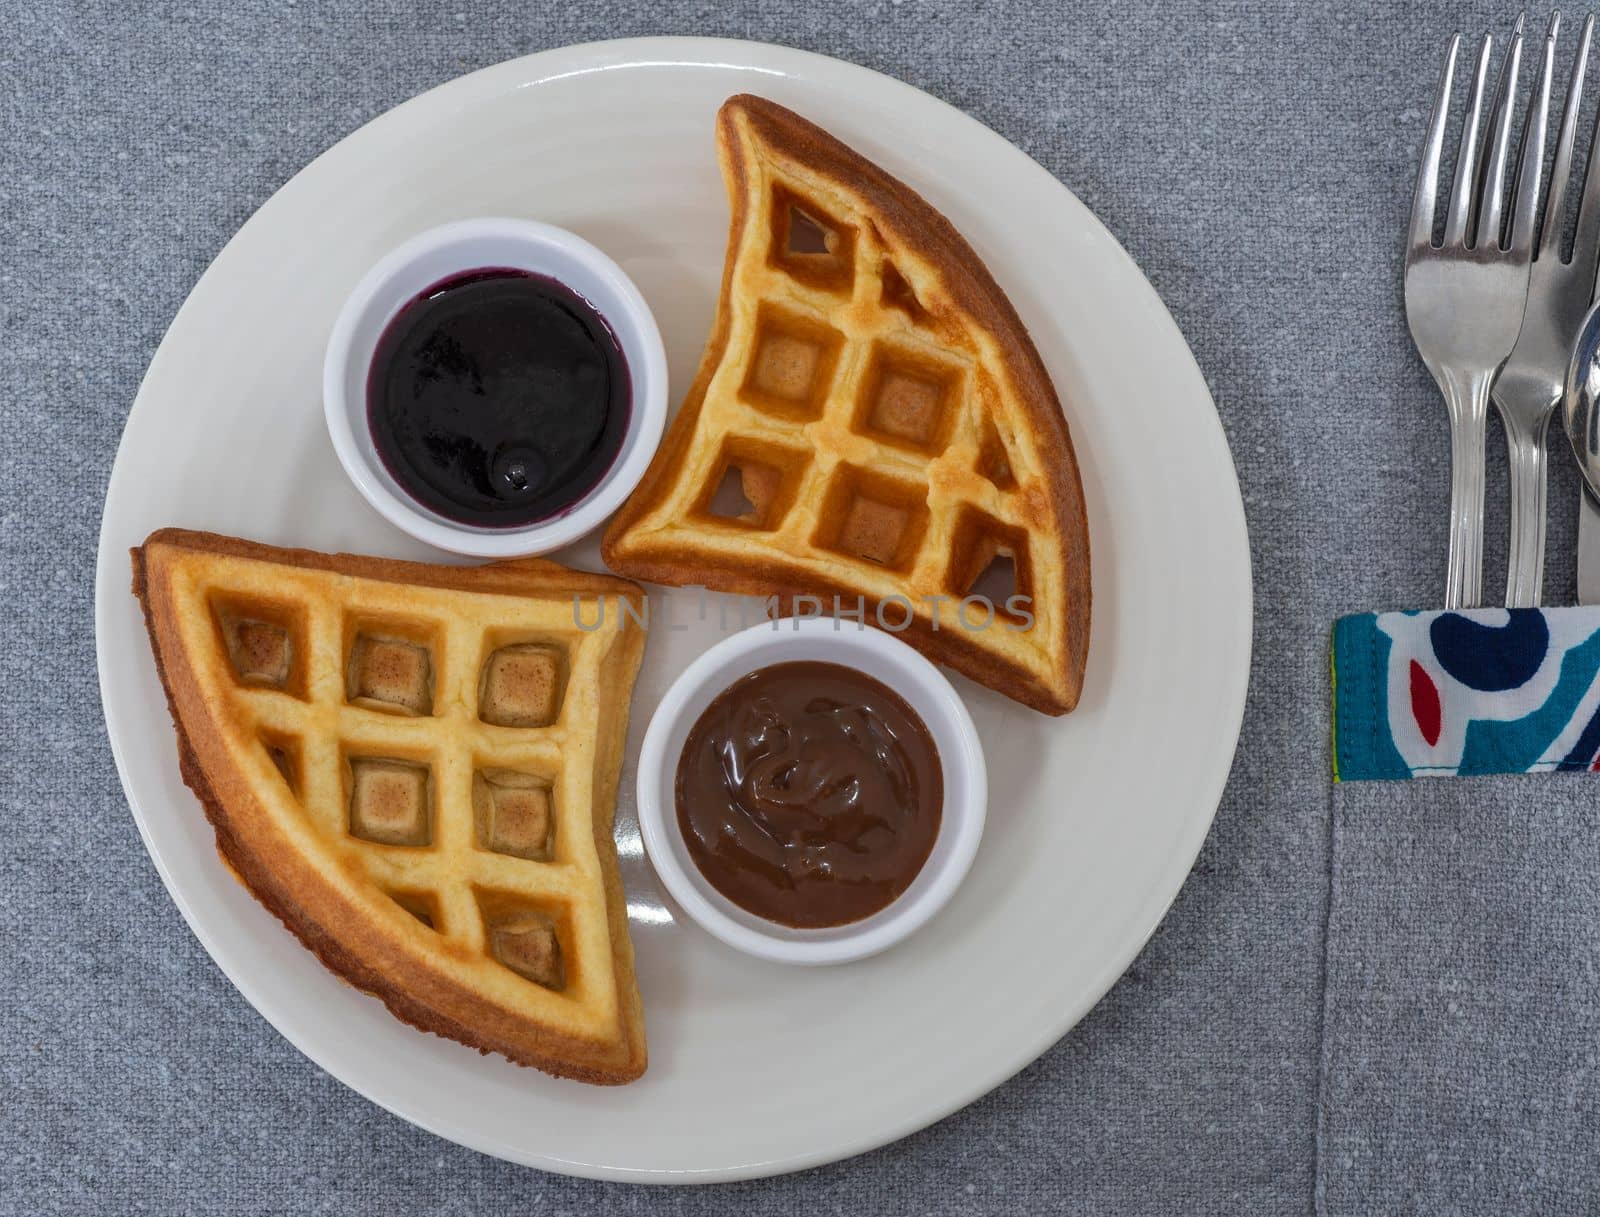 Waffle la carte dessert meal with blueberry and chocolate sauce dips on white plate at restaurant table setting